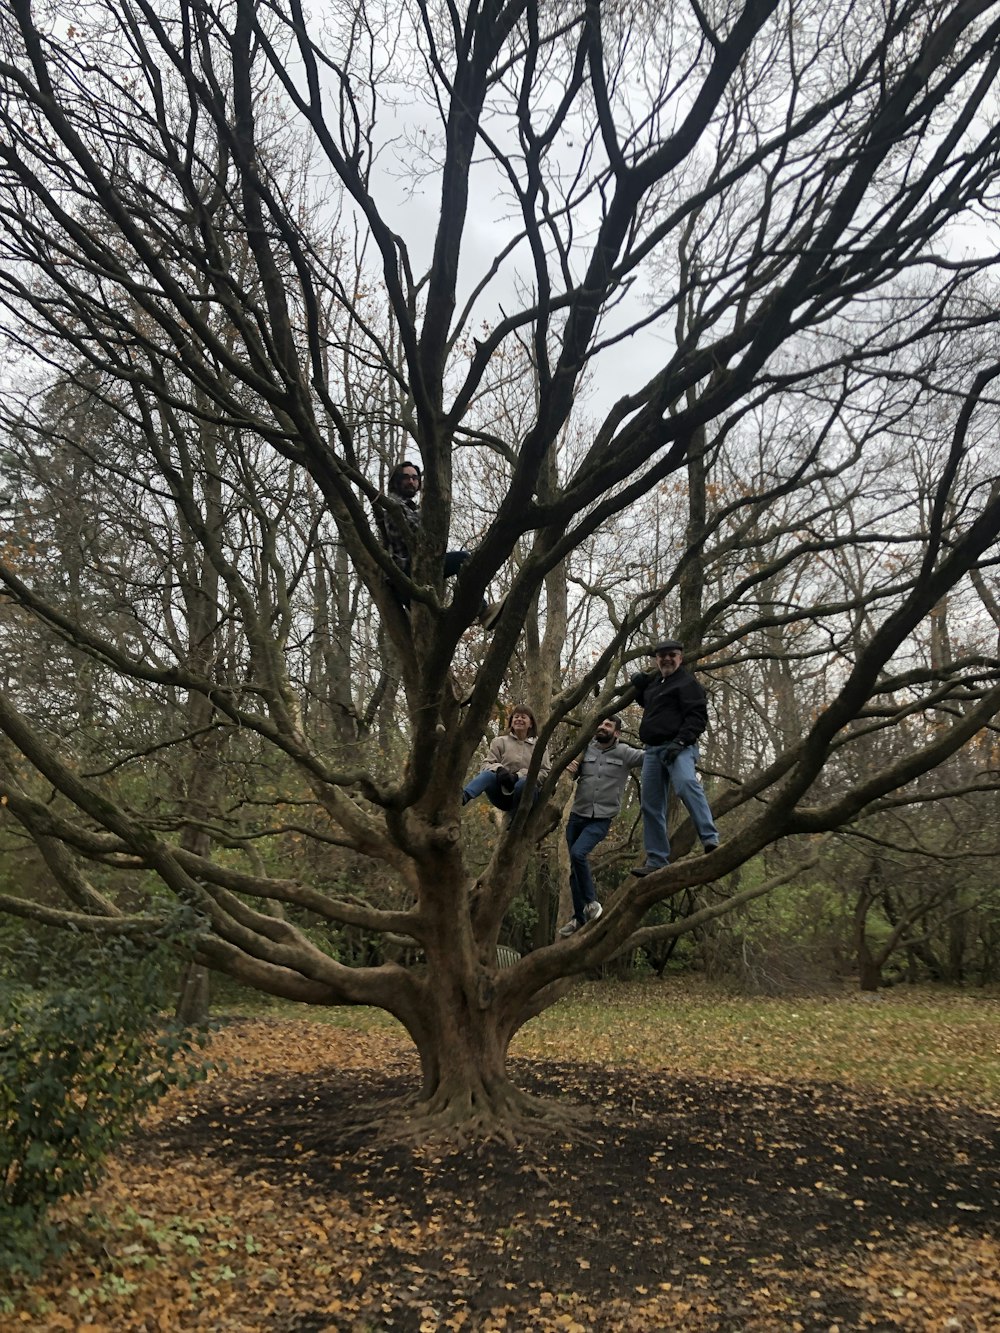 a group of people climbing up a tree